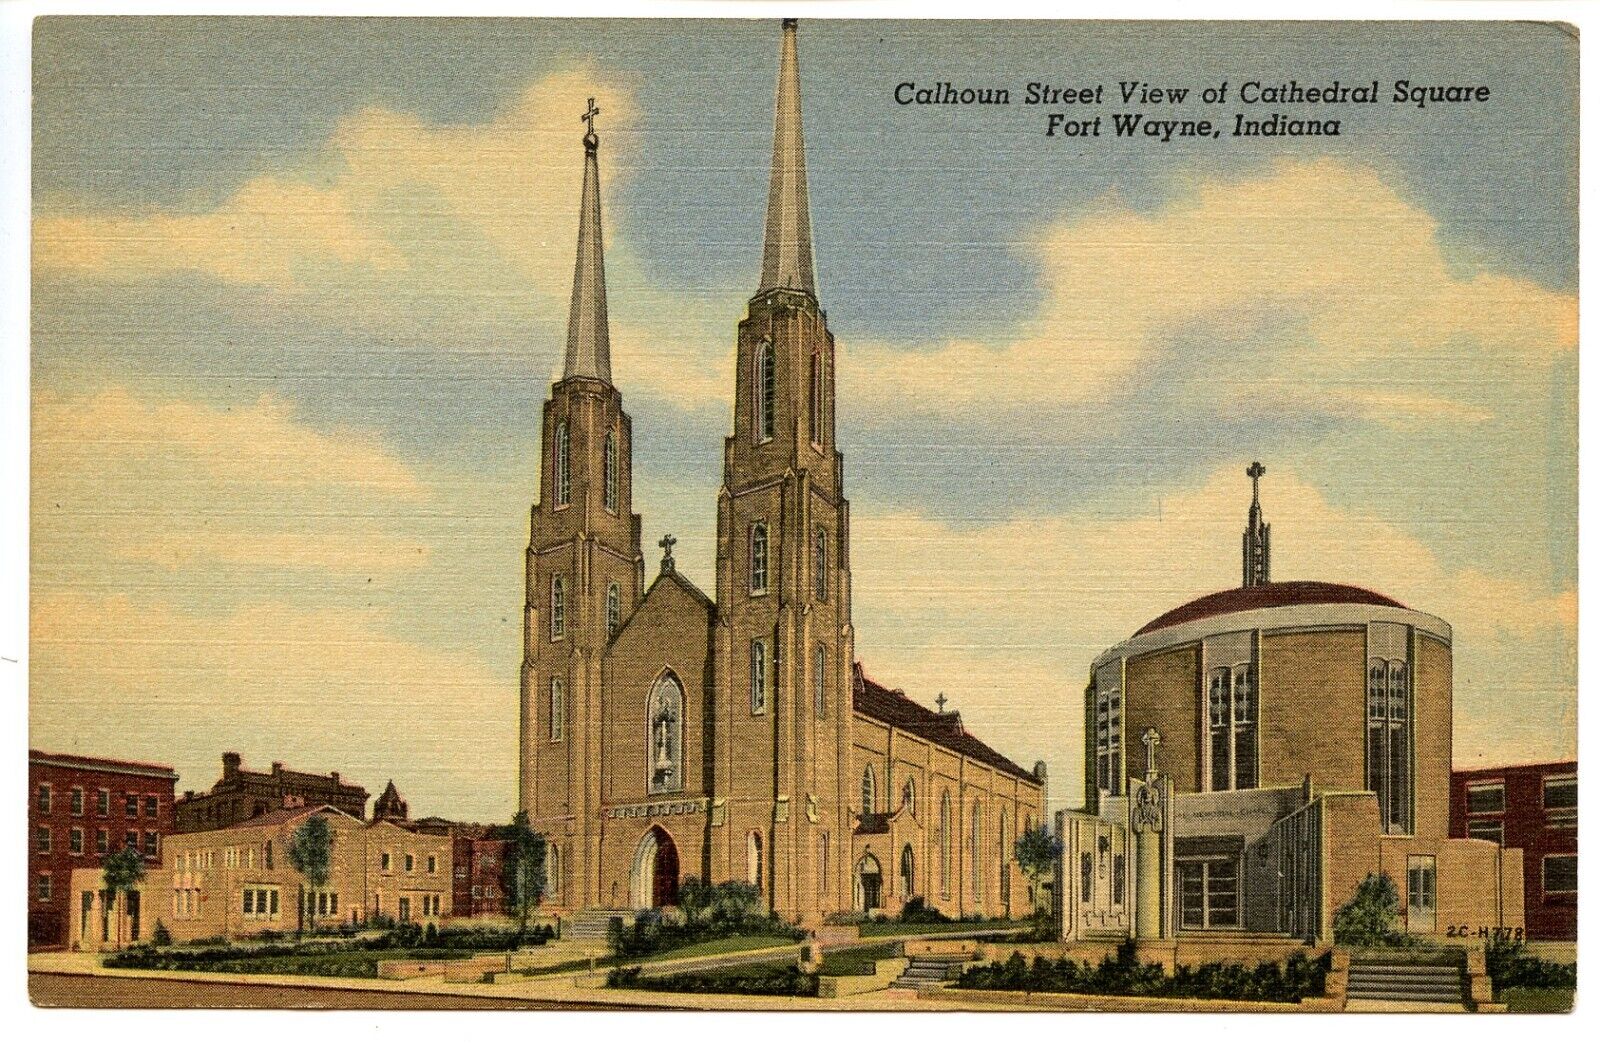 Calhoun Street View of Cathedral Square Fort Wayne IN Indiana Vintage Postcard